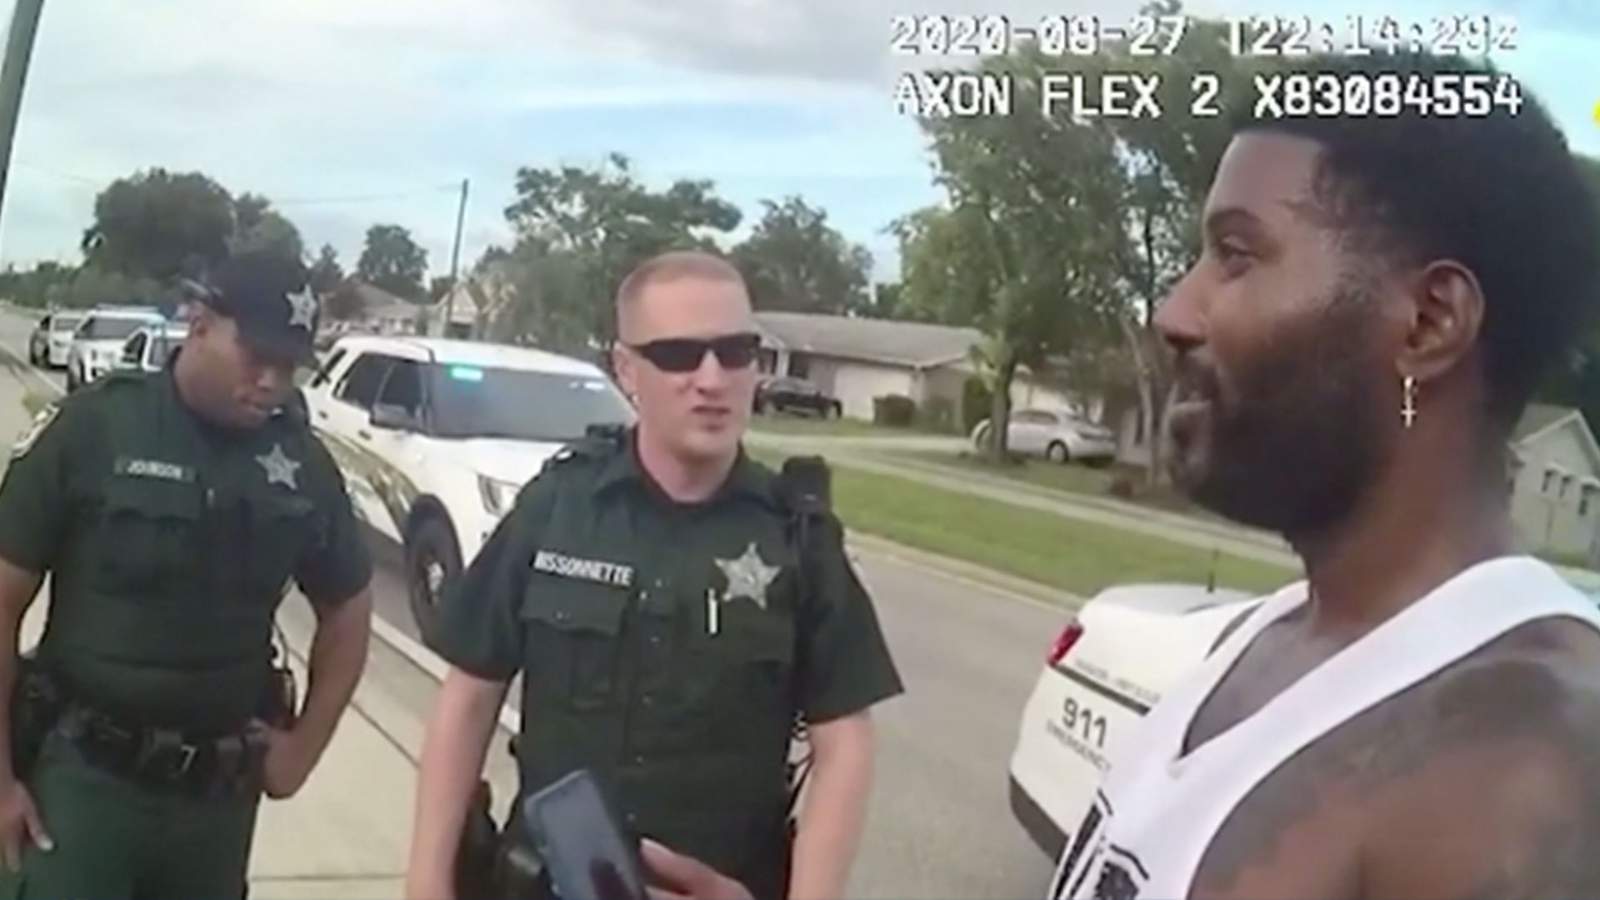 Black jogger detained by police in Florida yields different outcome than in San Antonio